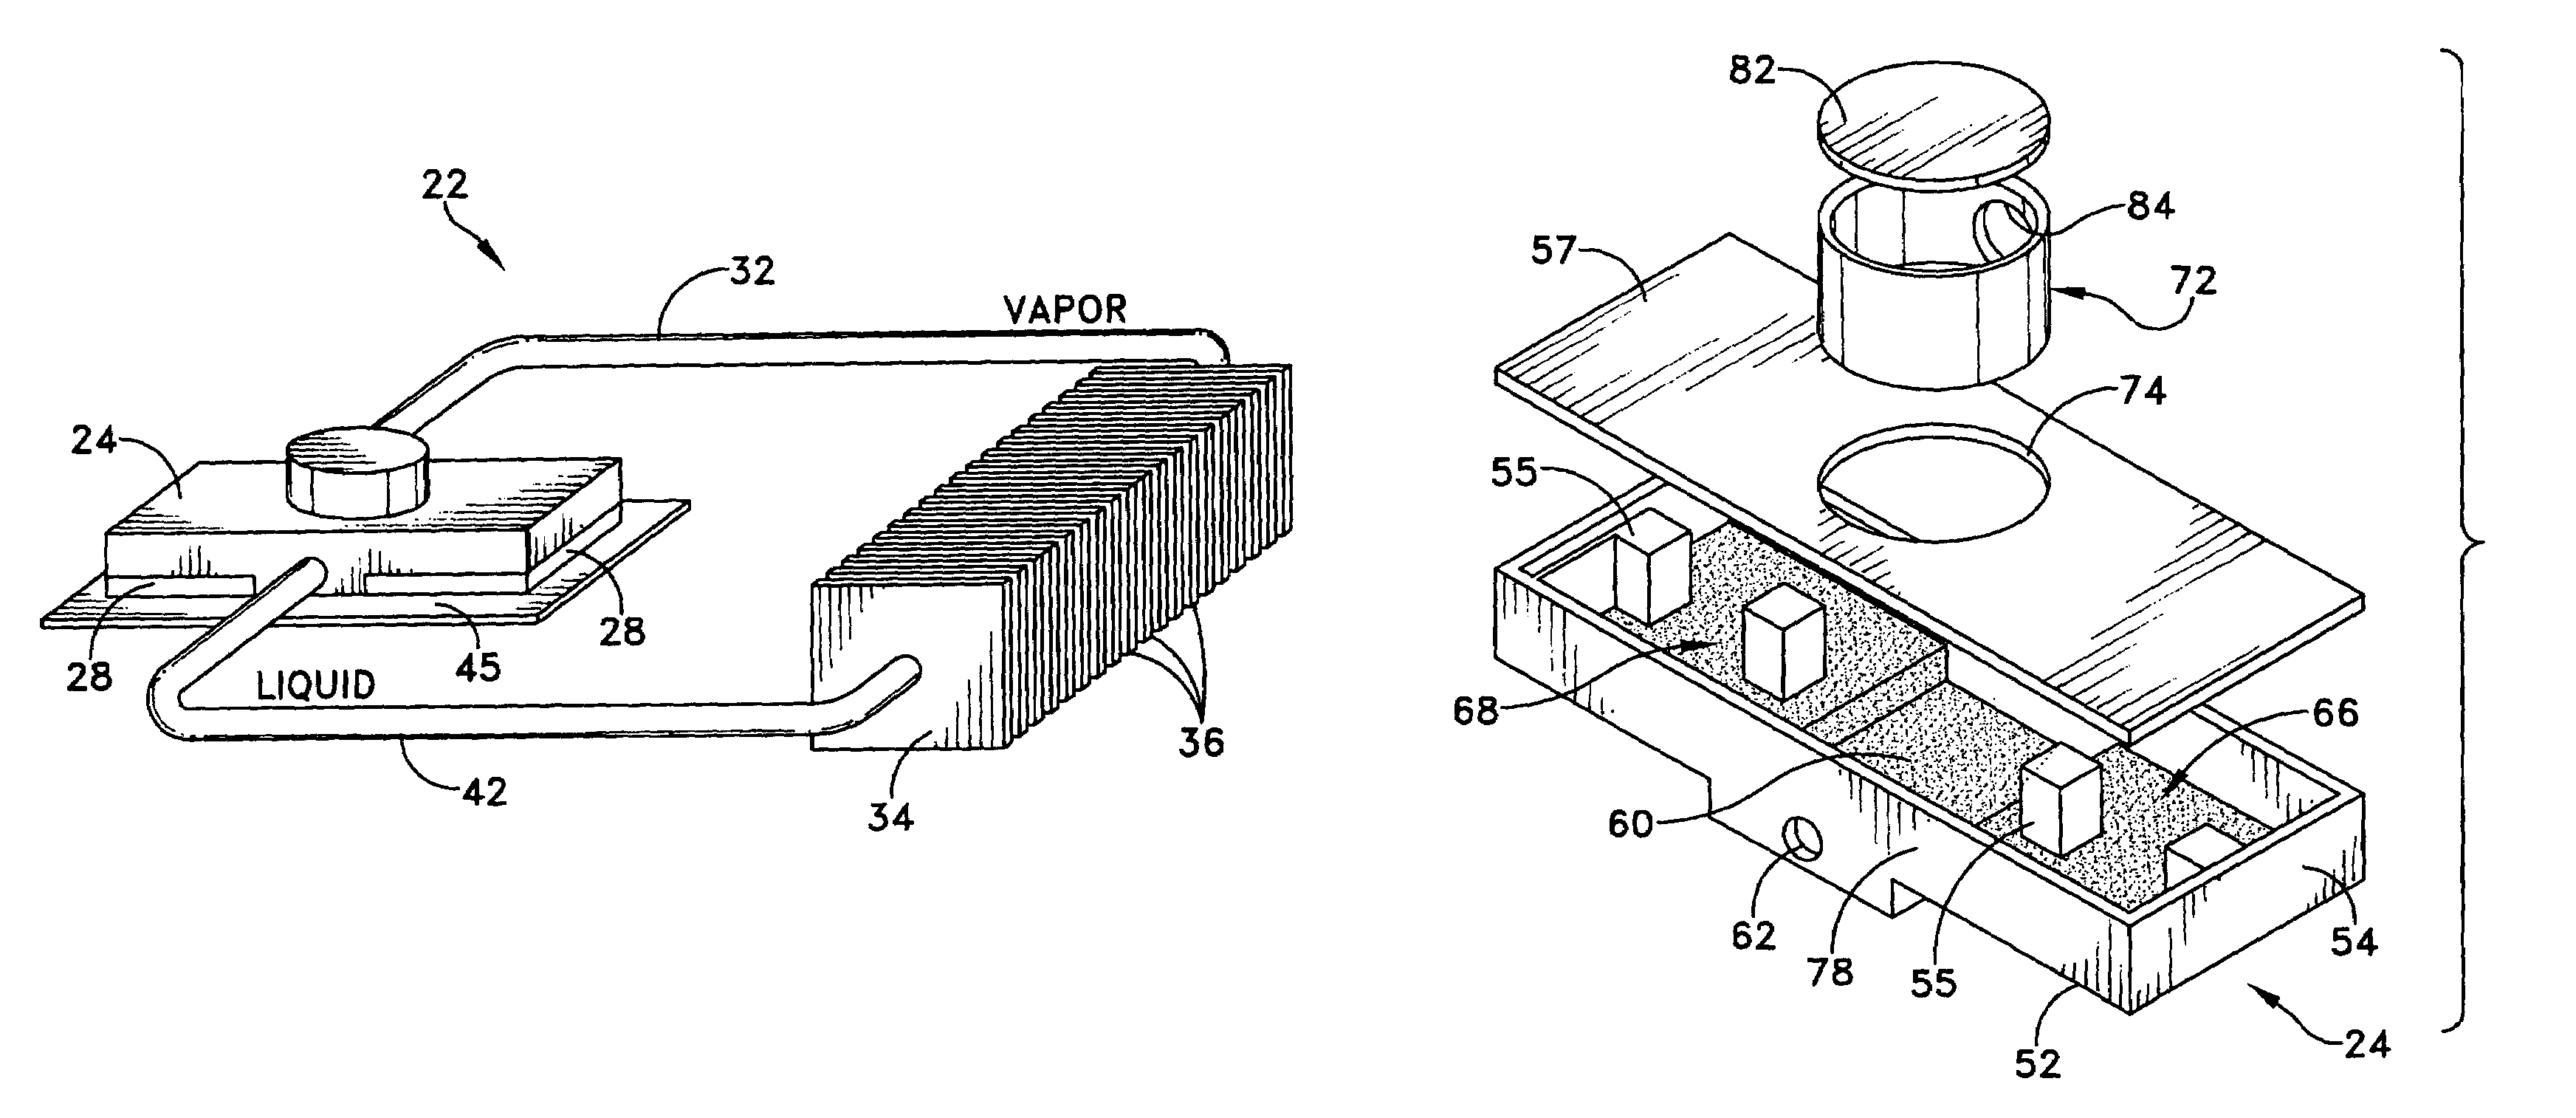 Fluid circuit heat transfer device for plural heat sources